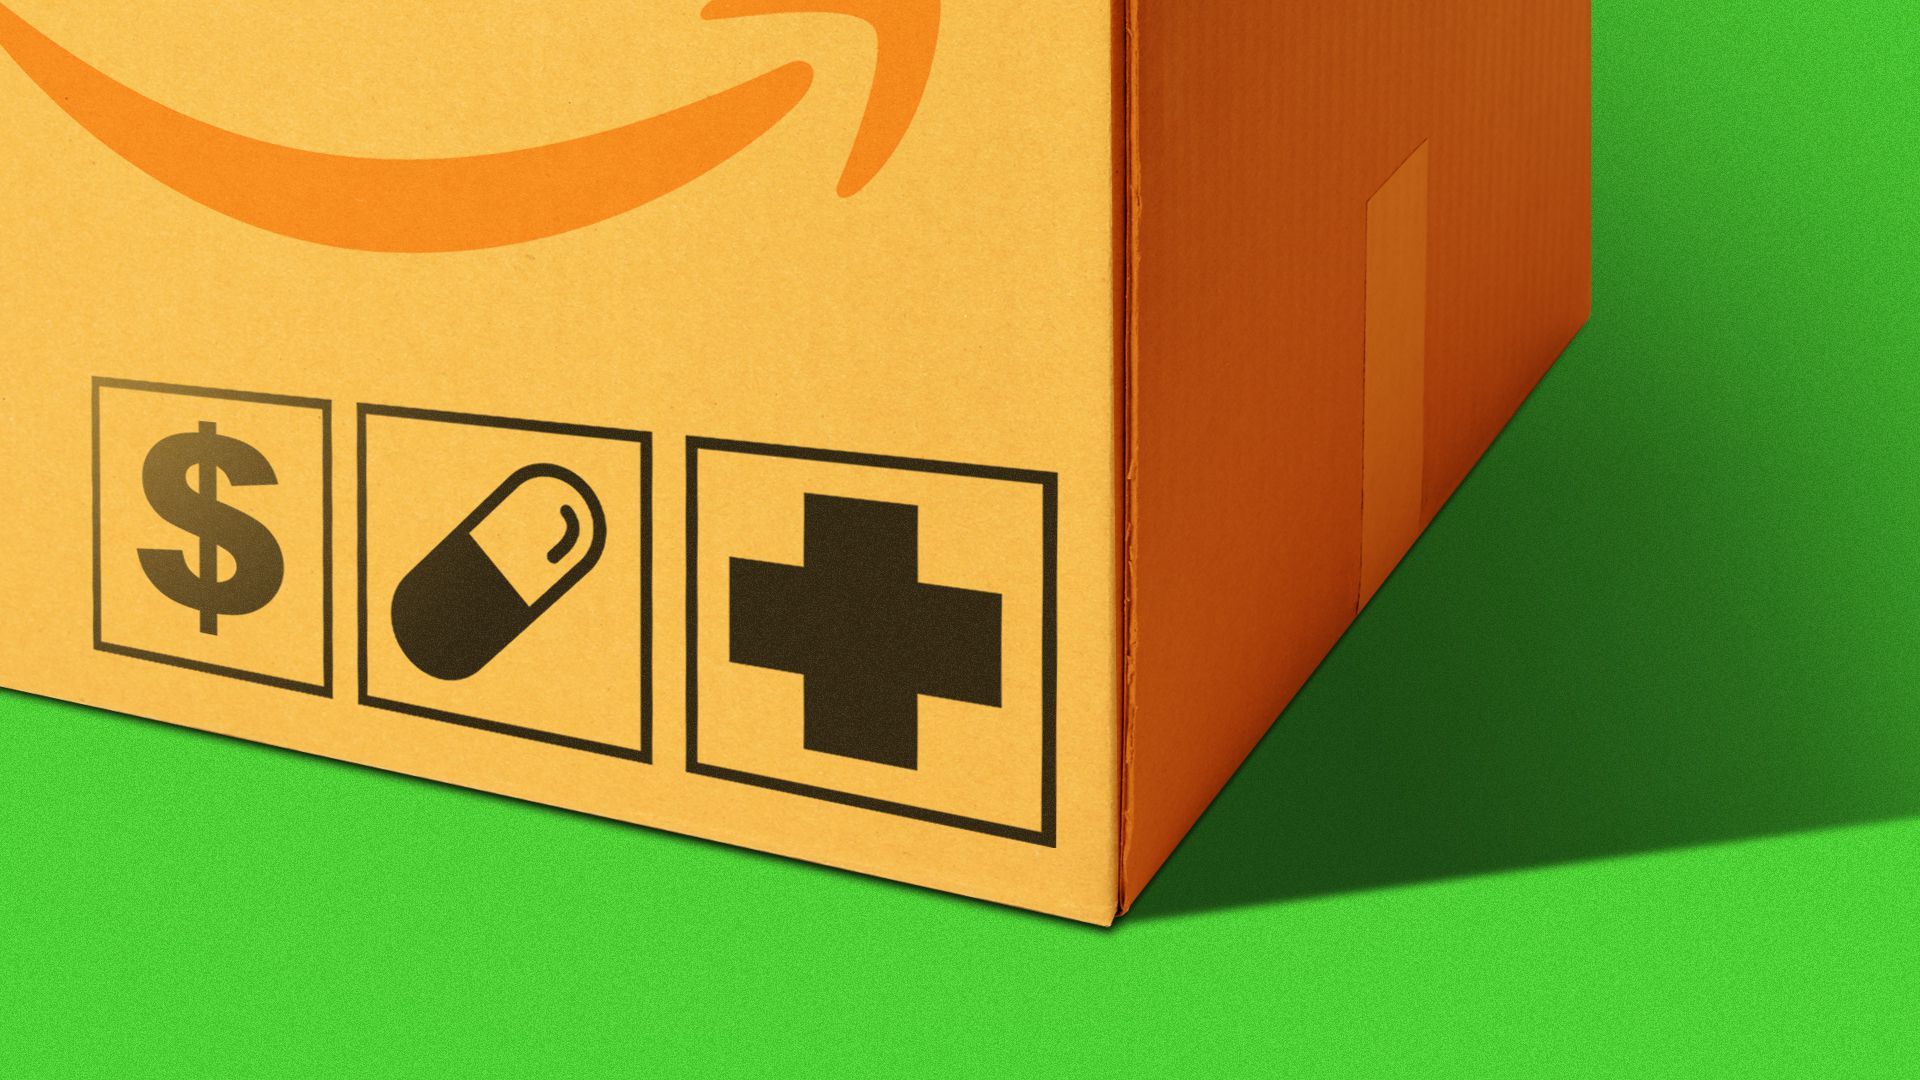 Illustration of an Amazon package with symbols of a dollar sign, a pill, and a cross